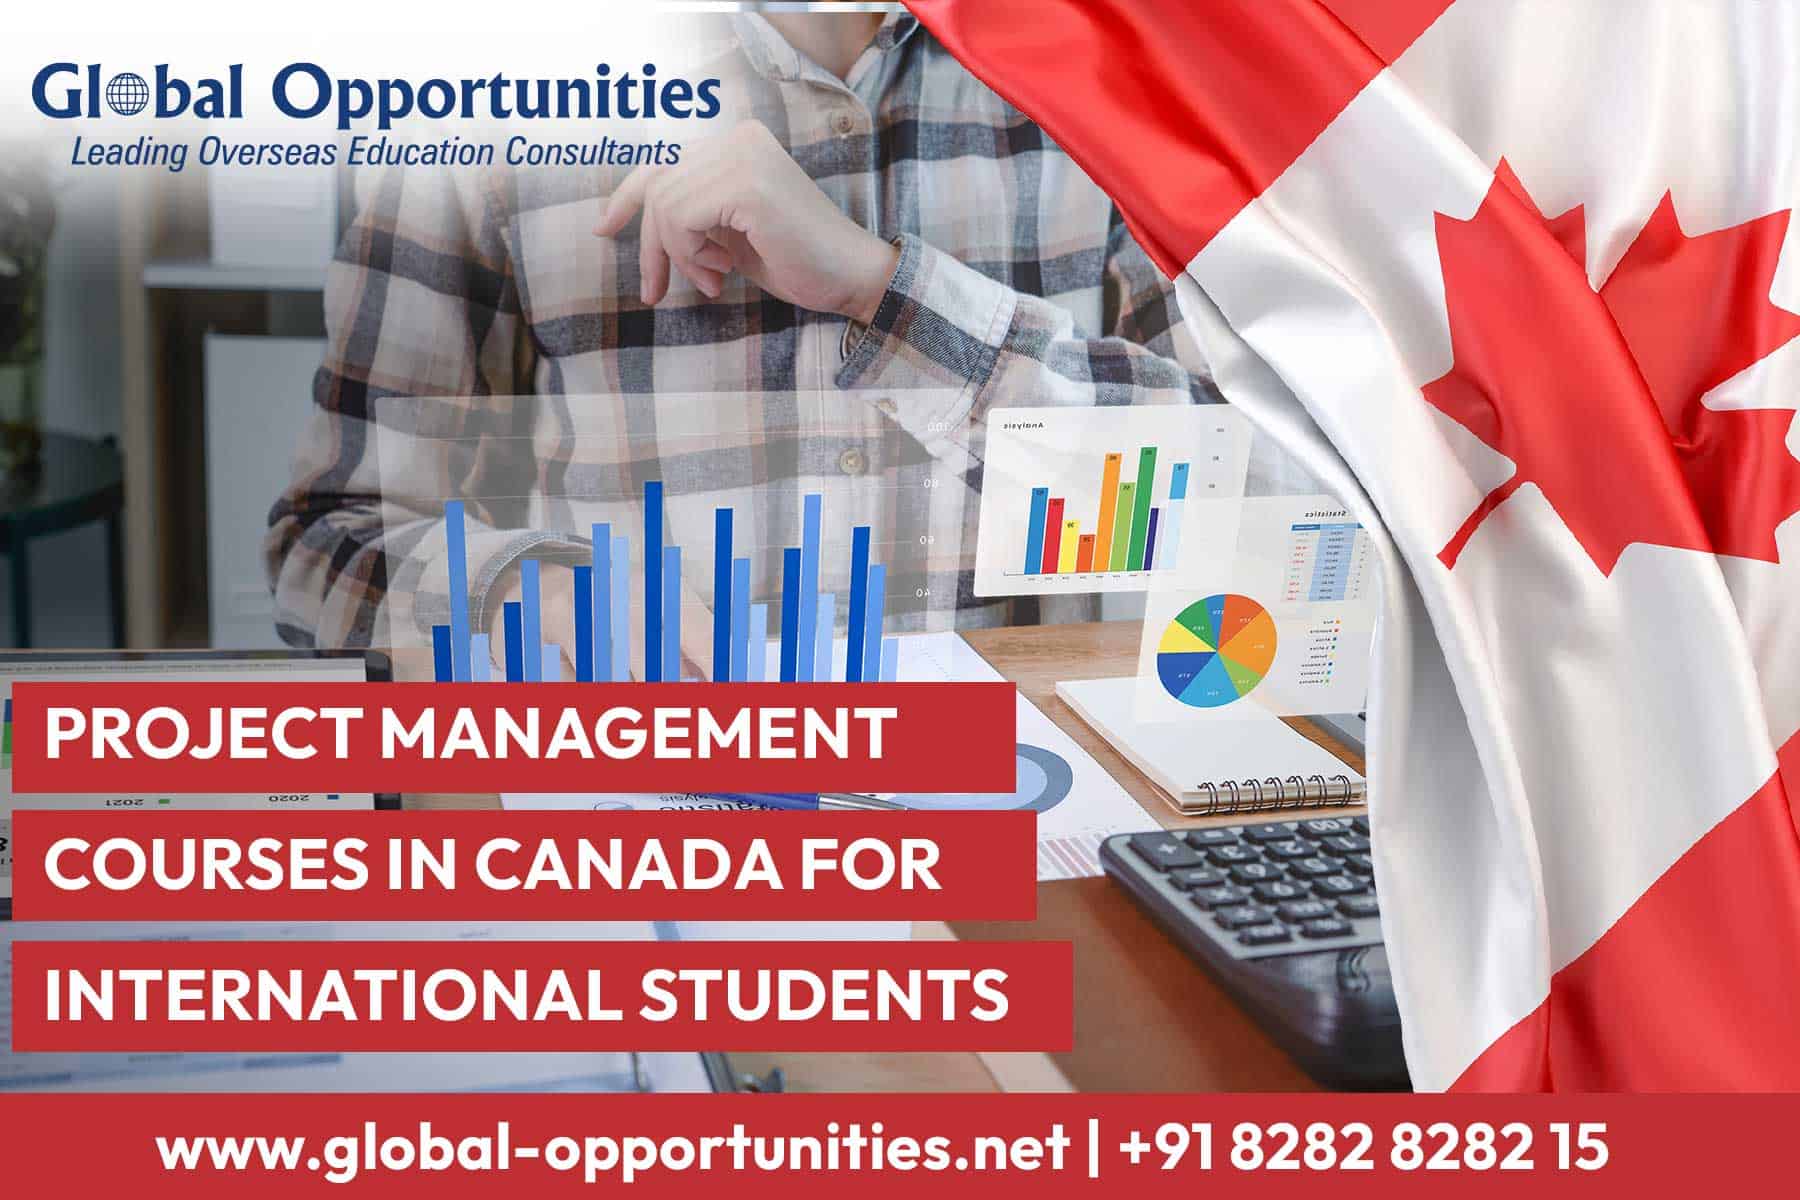 Project Management Courses in Canada for International Students